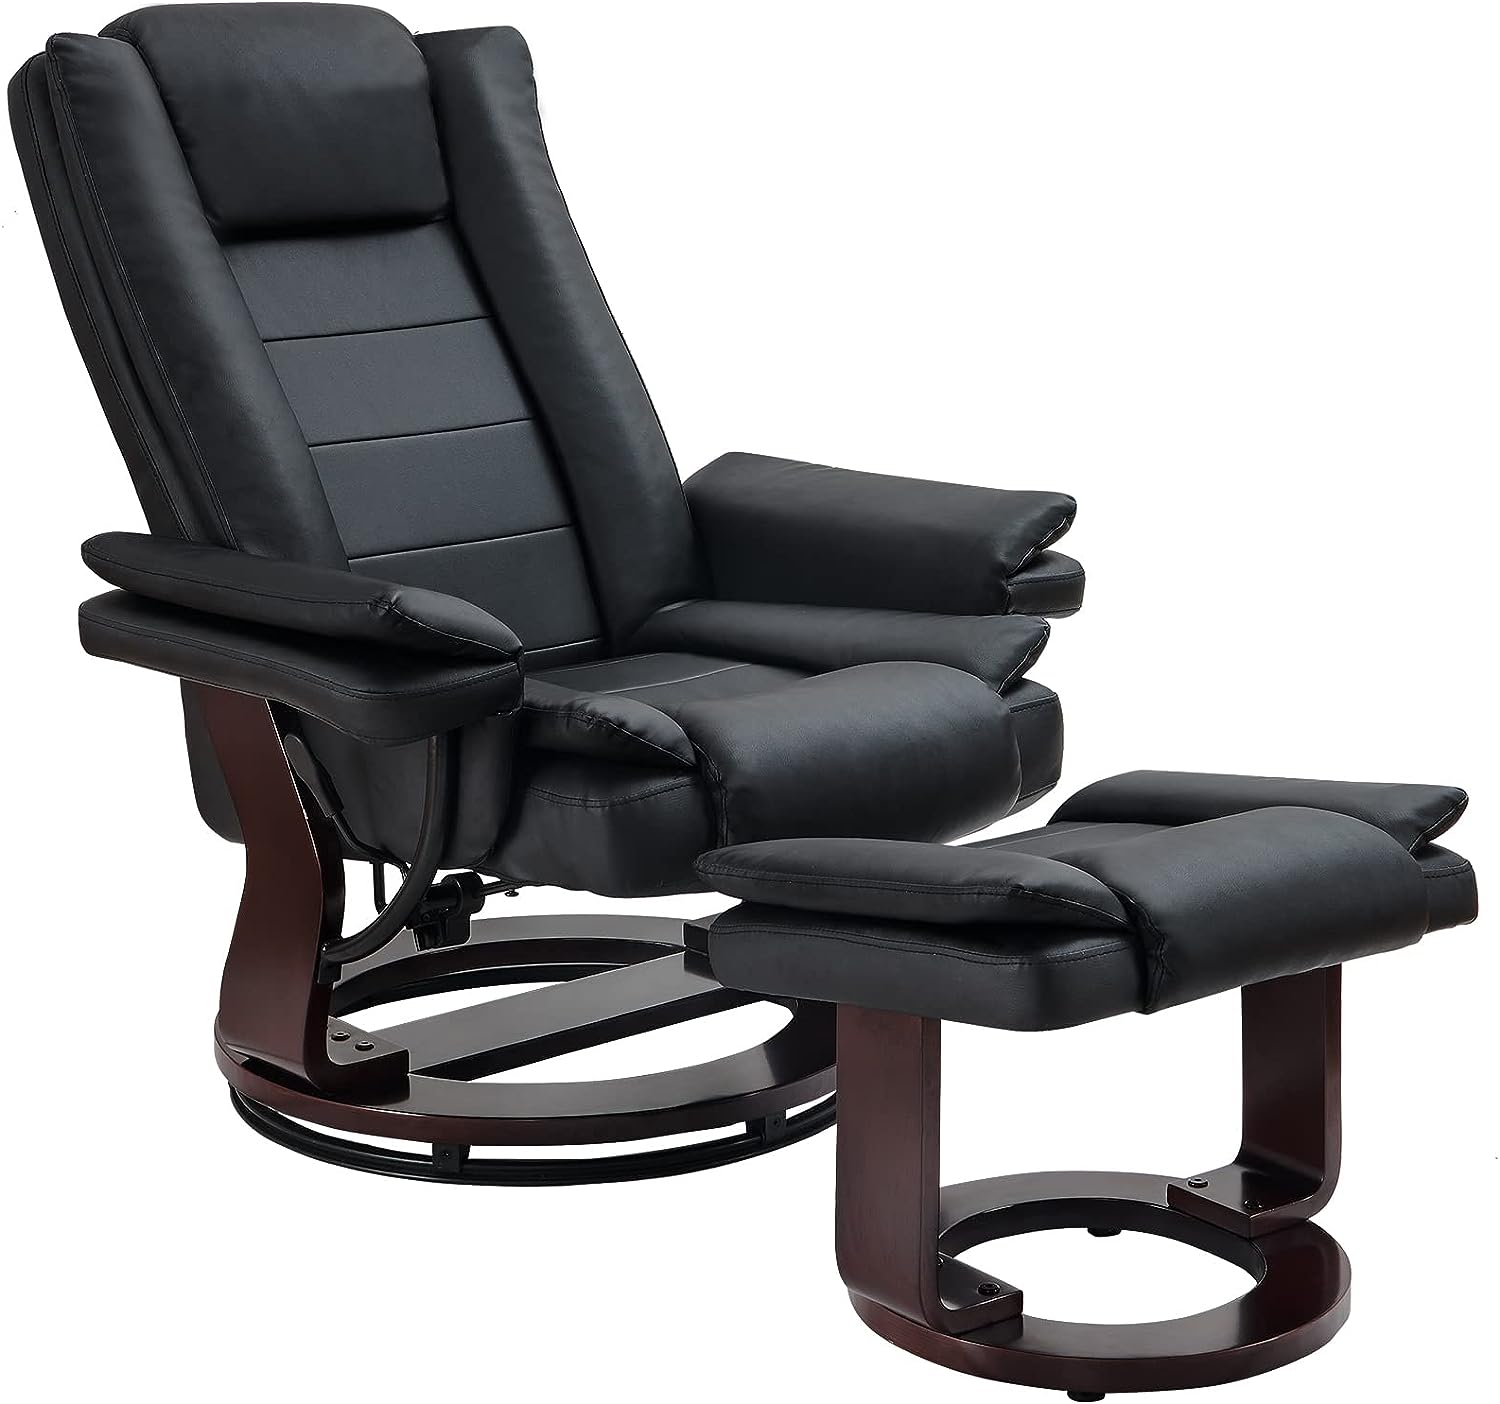 kinmars Recliner Chair with Ottoman PU Leather [...]